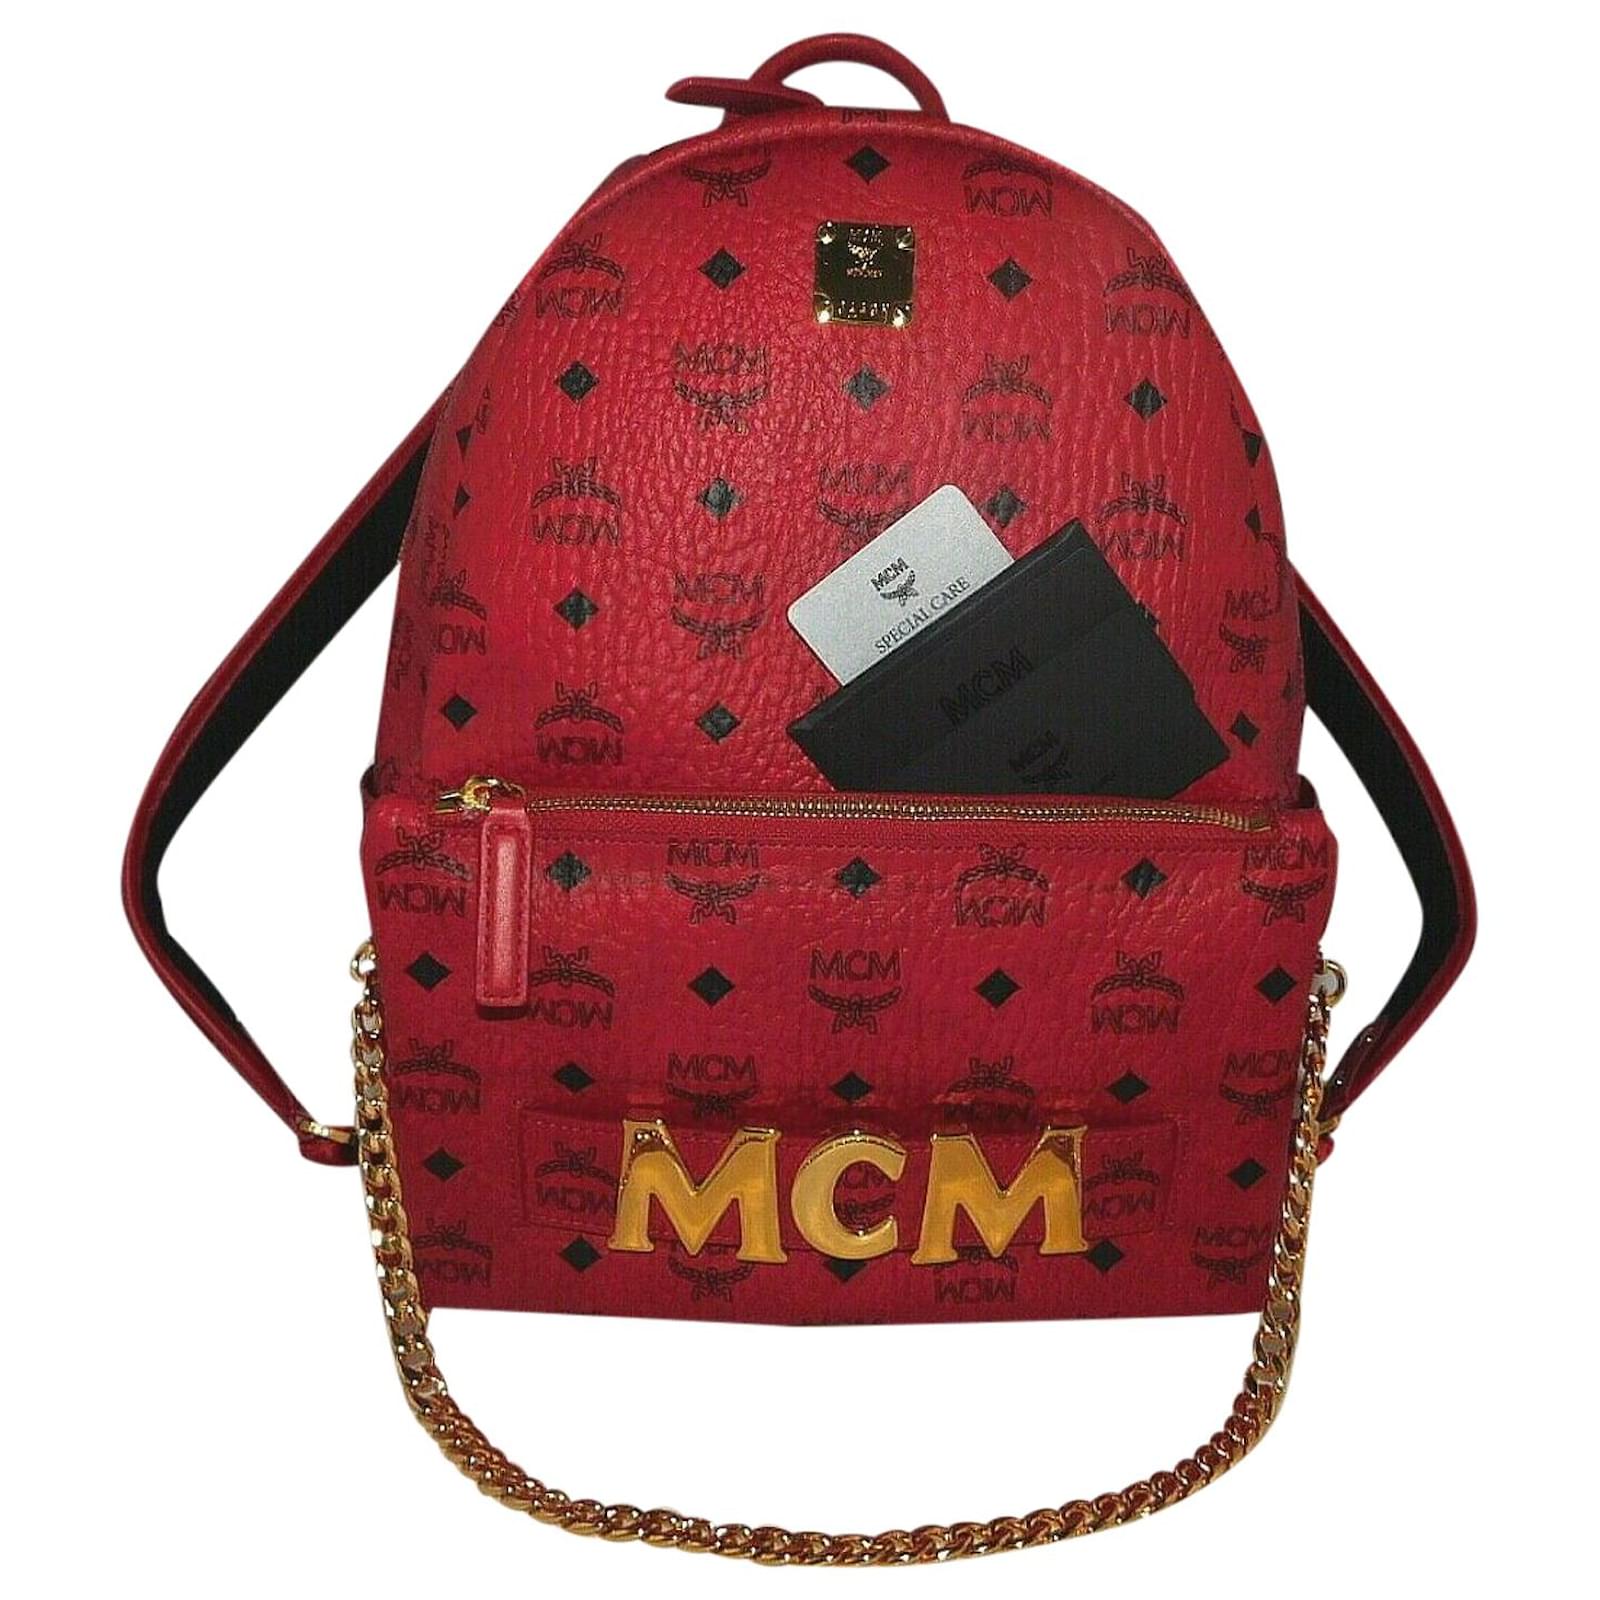 Mcm Pre-owned Women's Leather Cross Body Bag - Red - One Size